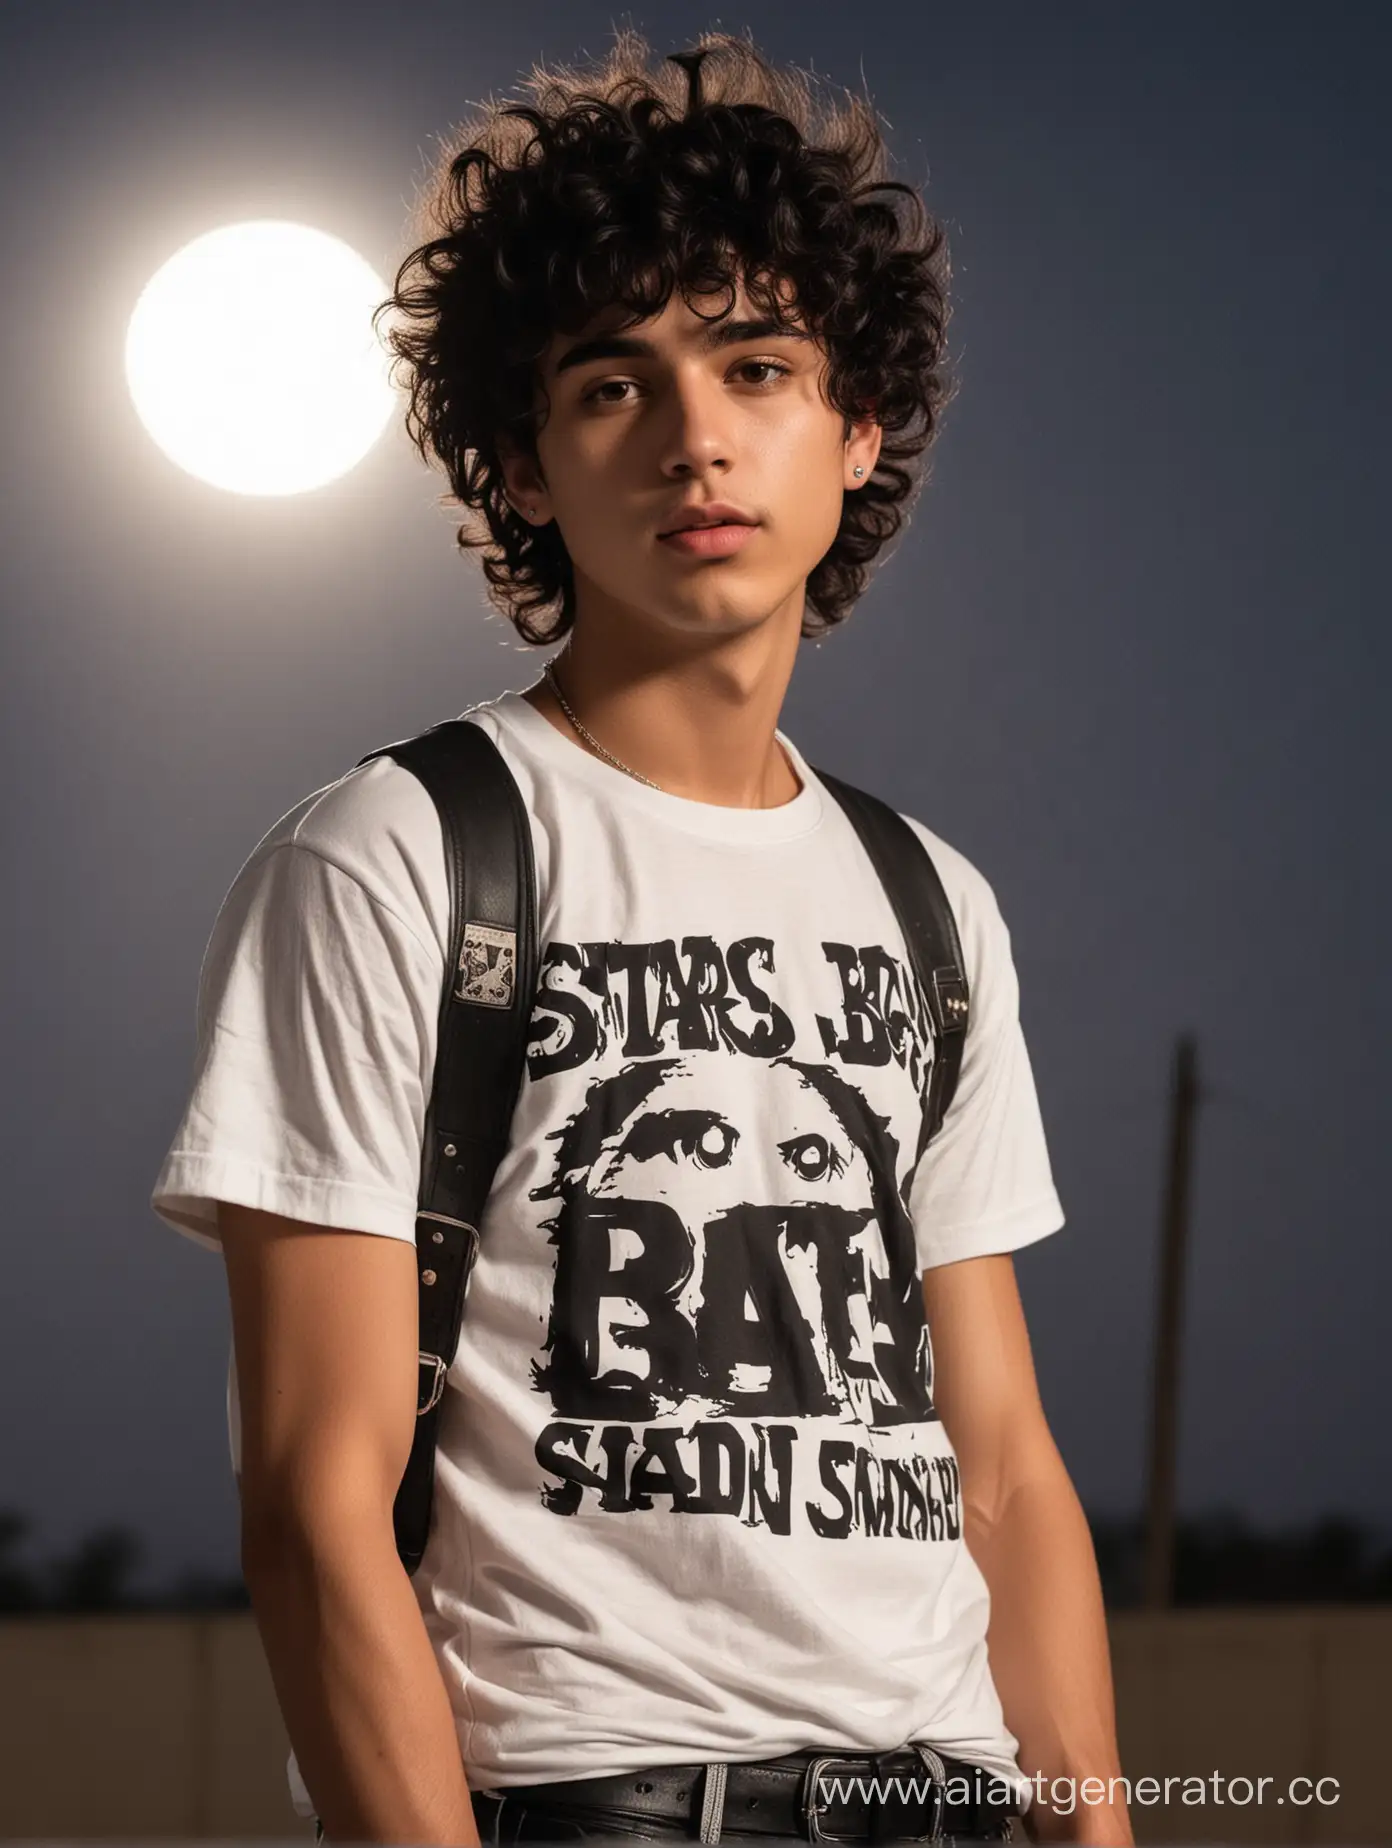 25 years old guy, baby face, sweet punk, charming air, black short fluffy curly hair, brown eyes, cream skin, bad boy aura, white t-shirt and black biker cool outfit, stars-full moon in the background.